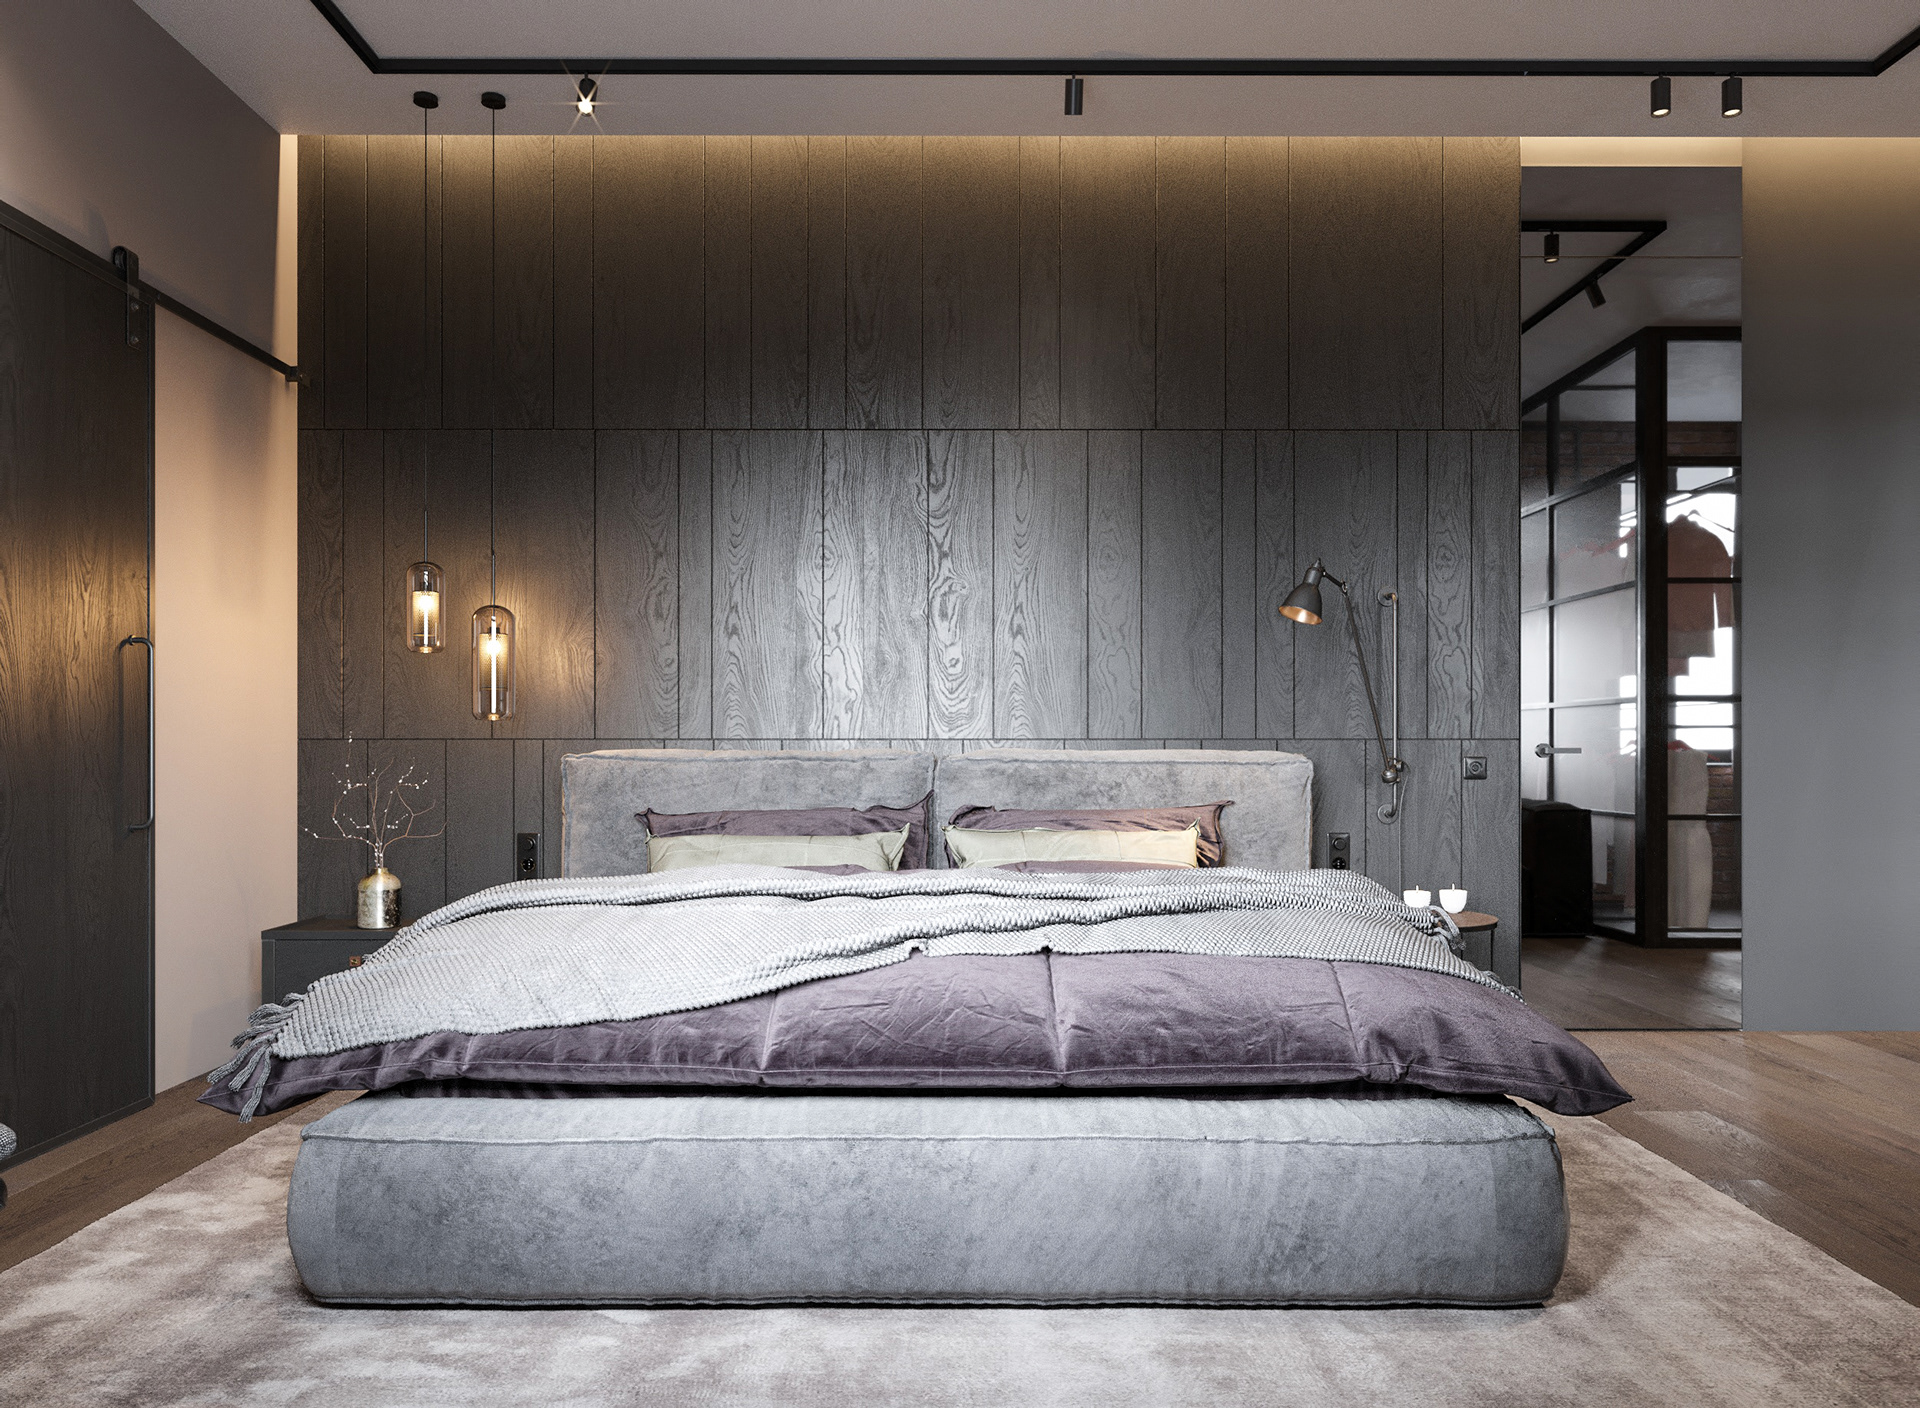  bedroom in contemporary style with loft elements.